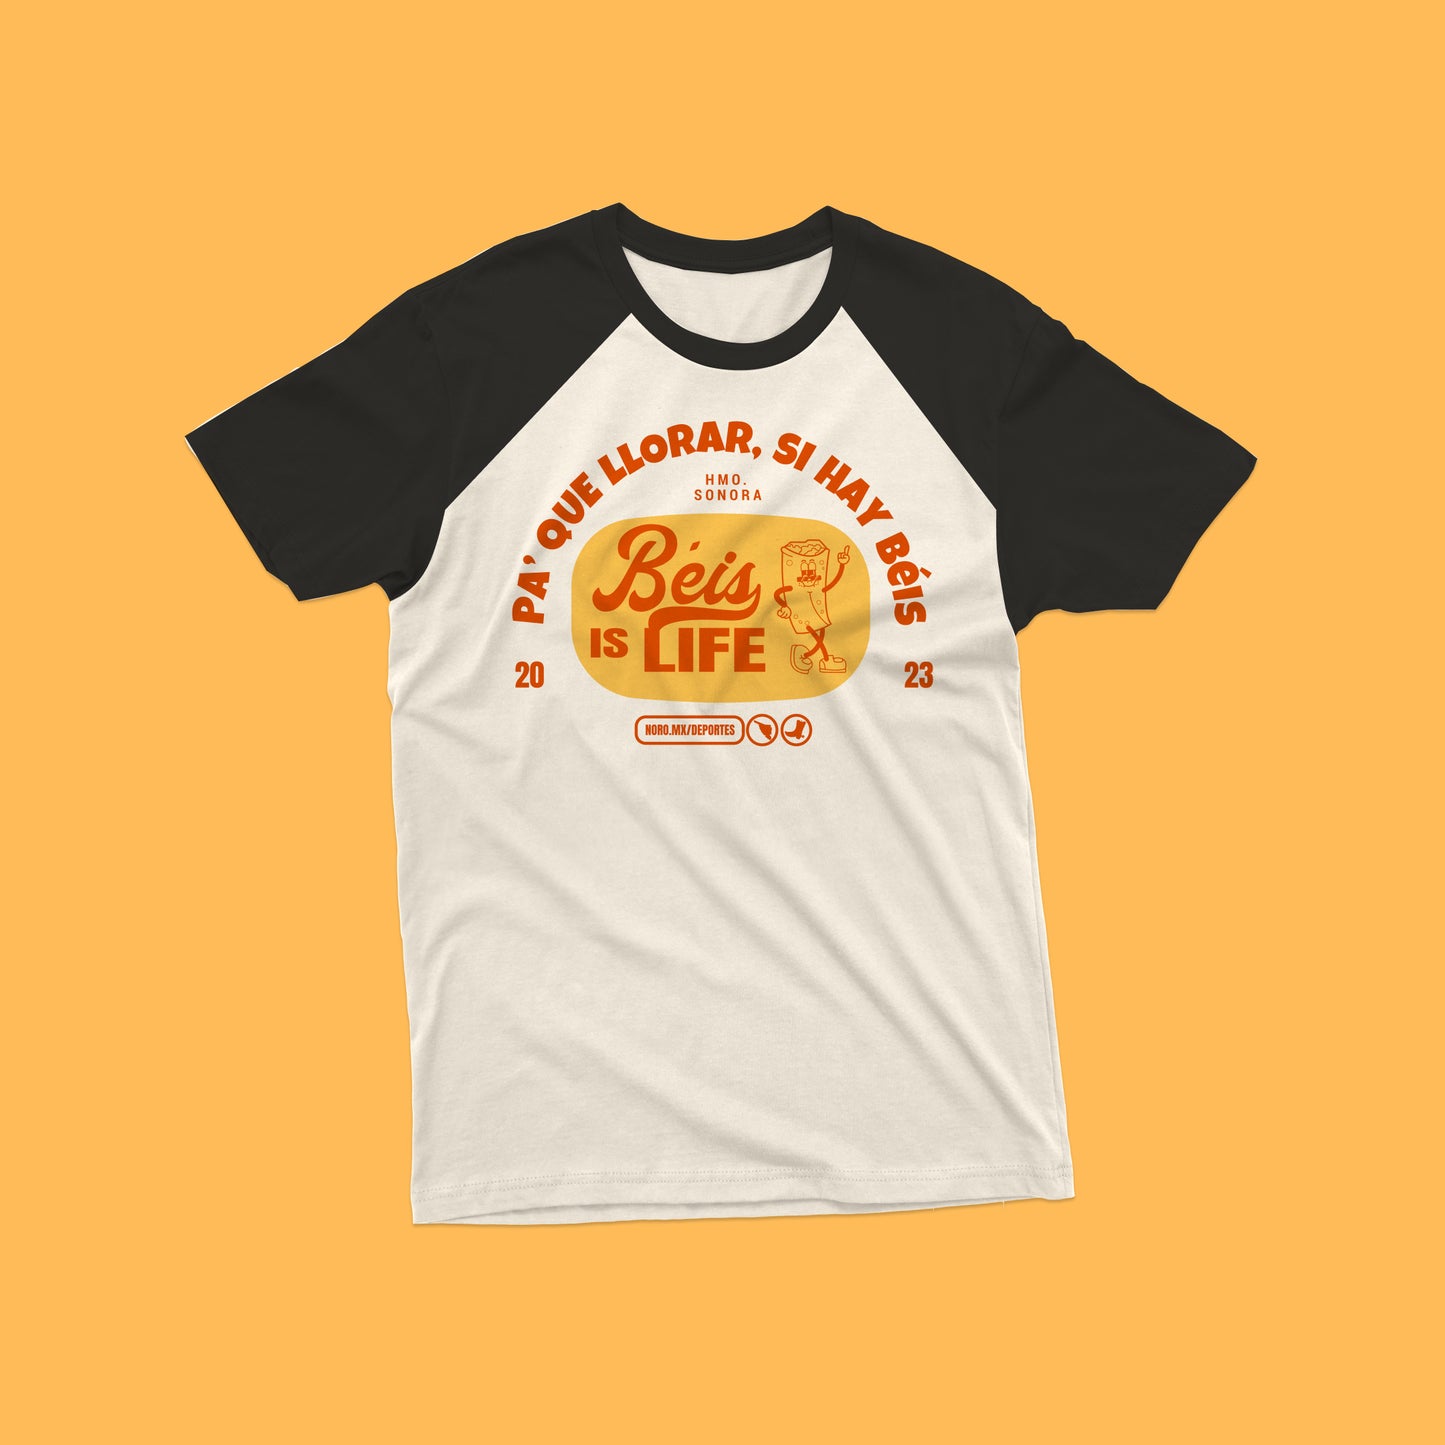 Beis is life t-shirt